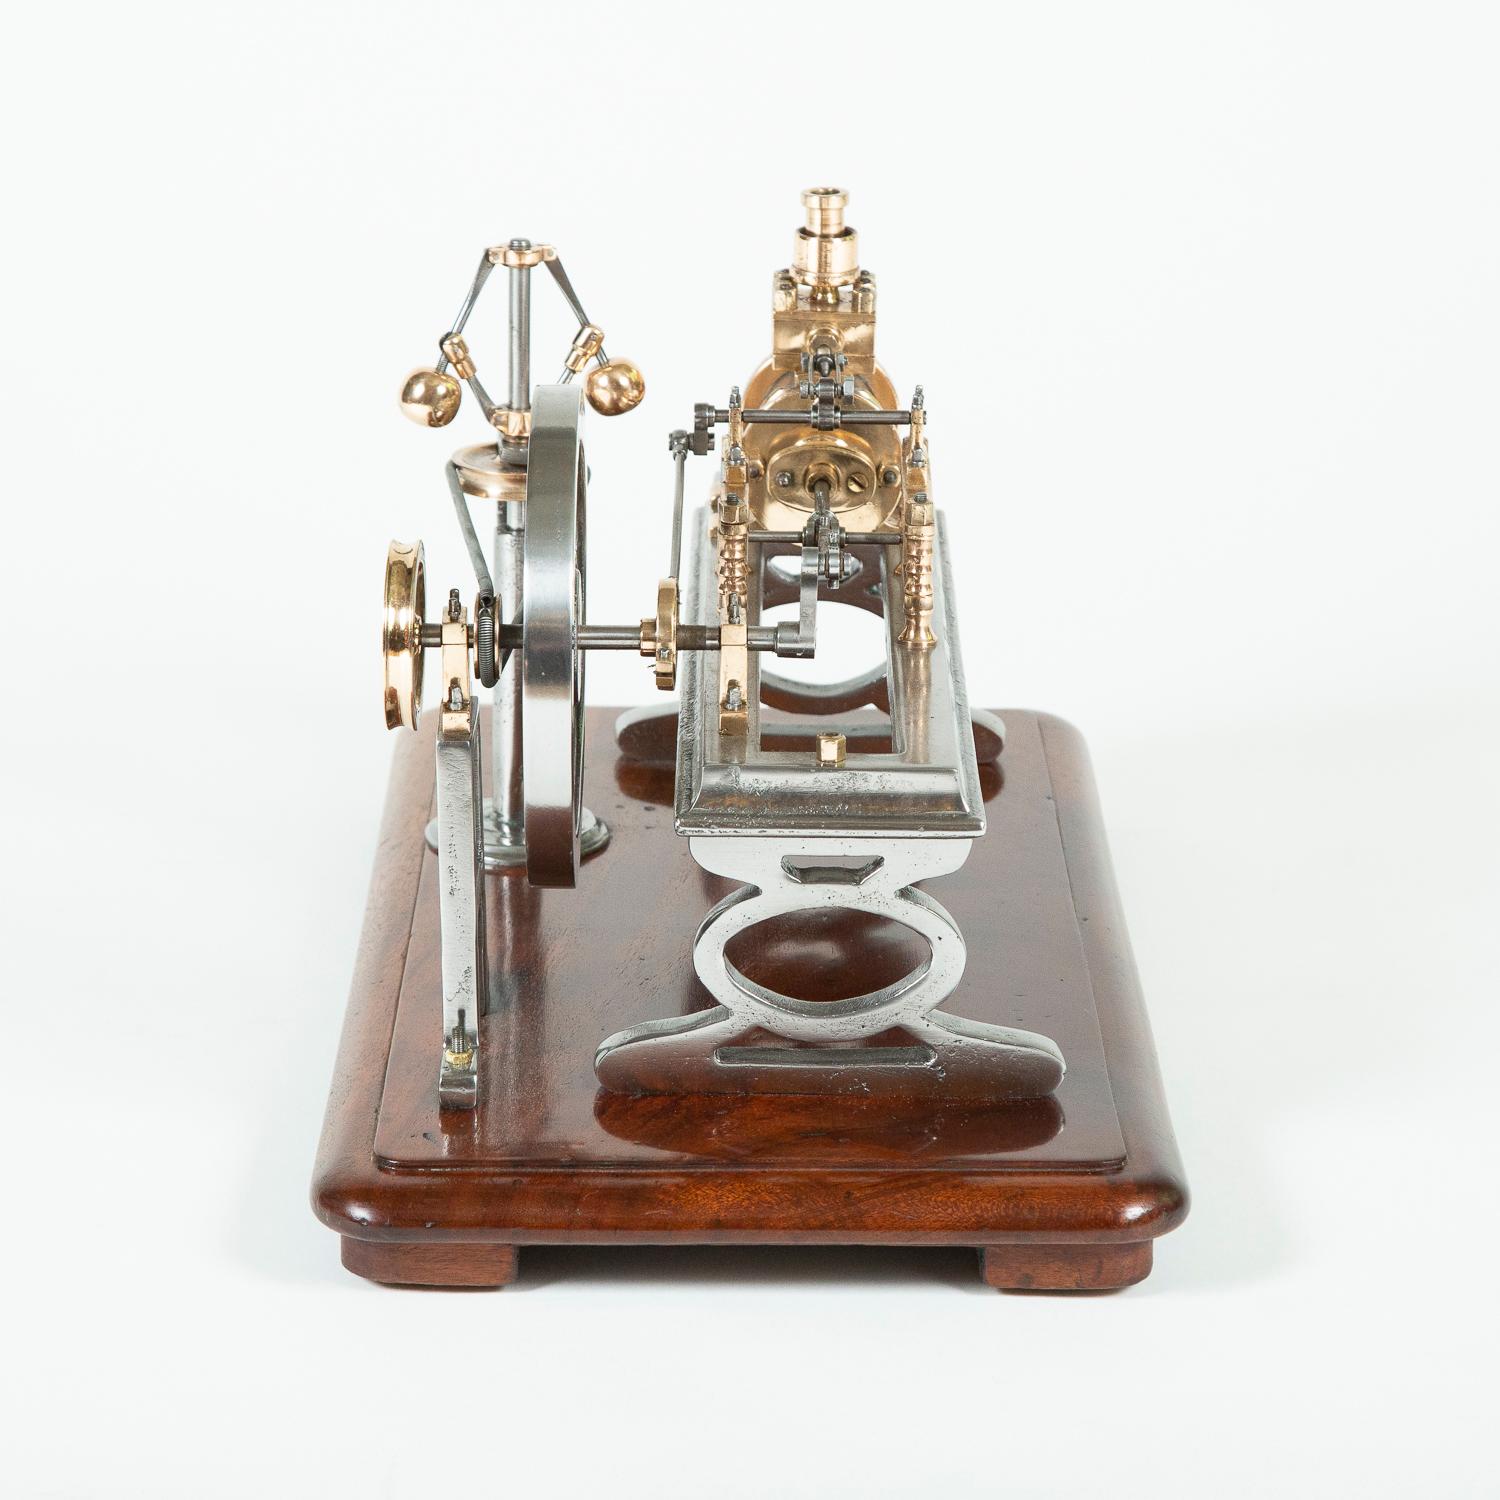 Victorian Tabletop Model of a Single Cylinder Steam Engine